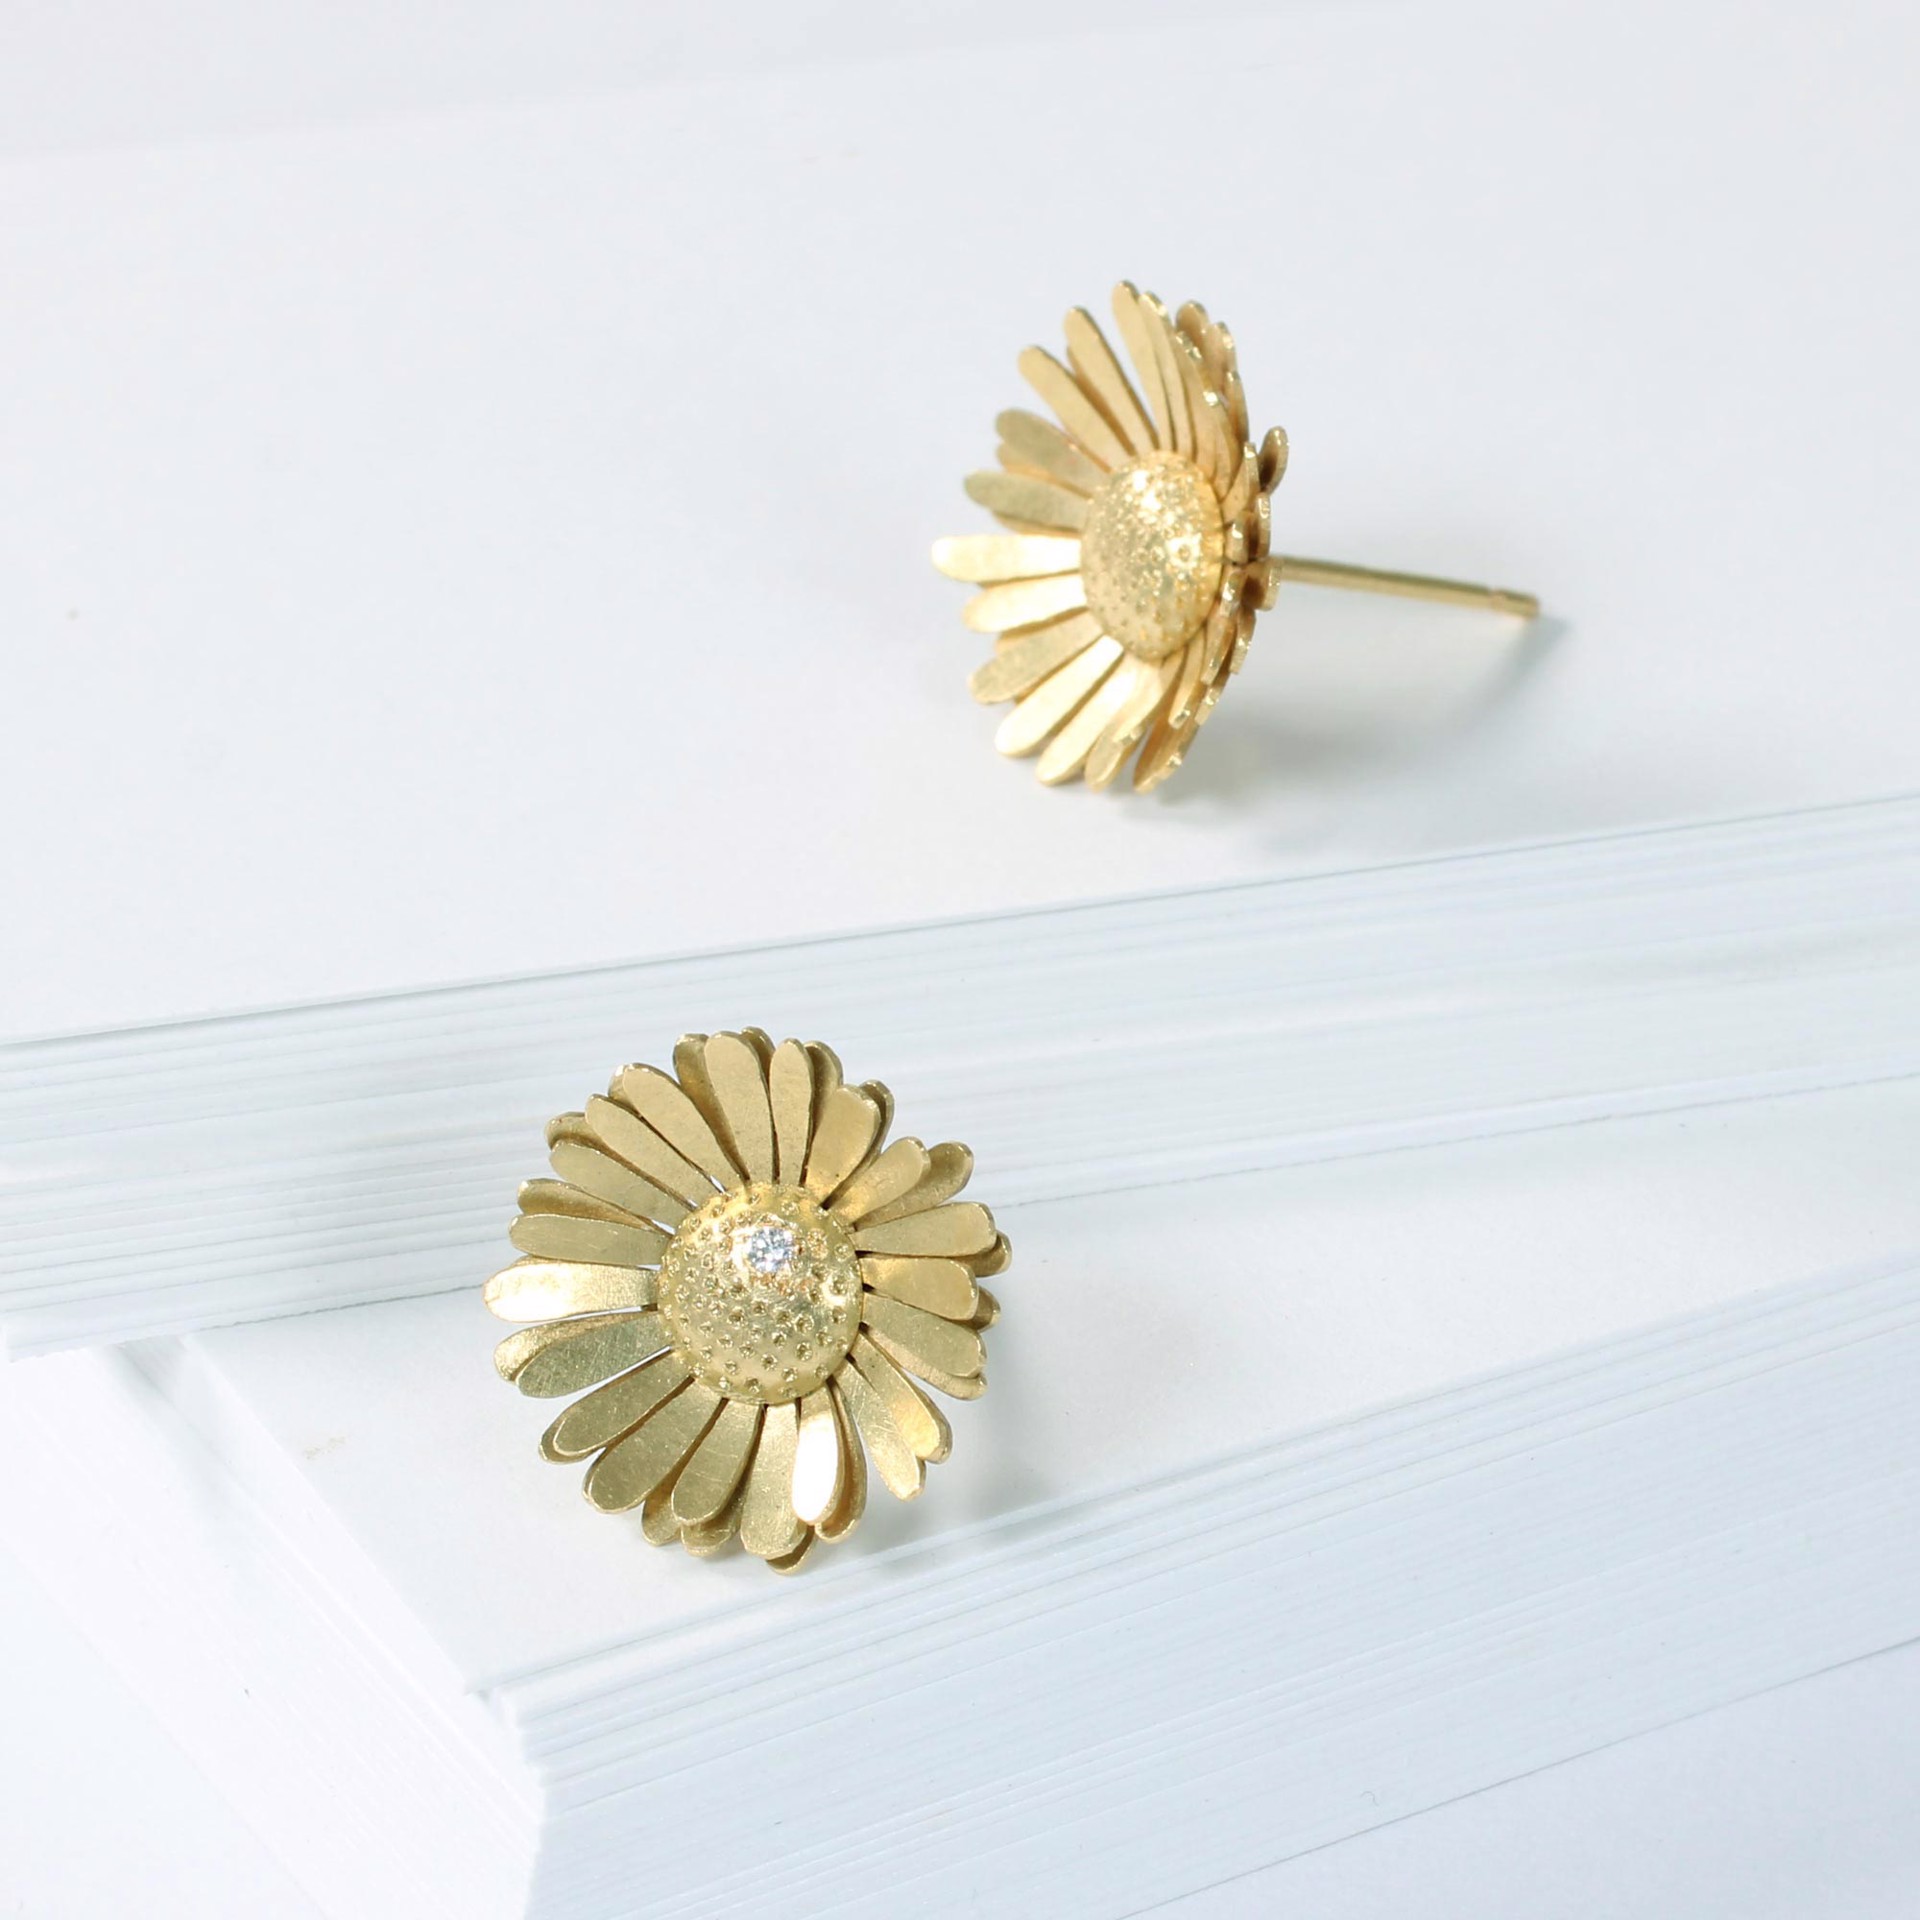 Golden Daisy Earrings by Christopher Thompson-Royds